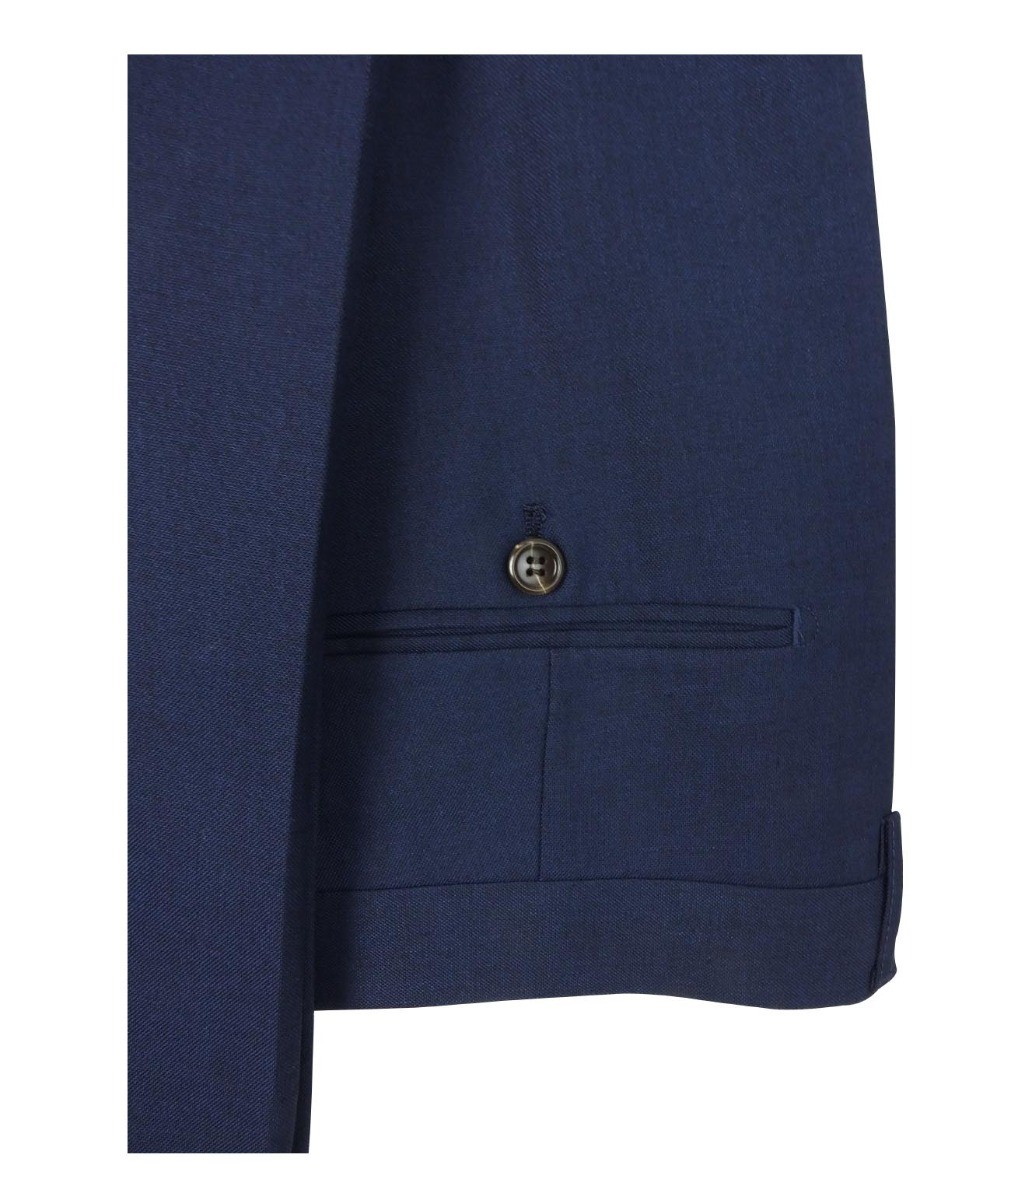 Men's Tailored Fit Formal Trousers  - CHARLES - Navy Blue